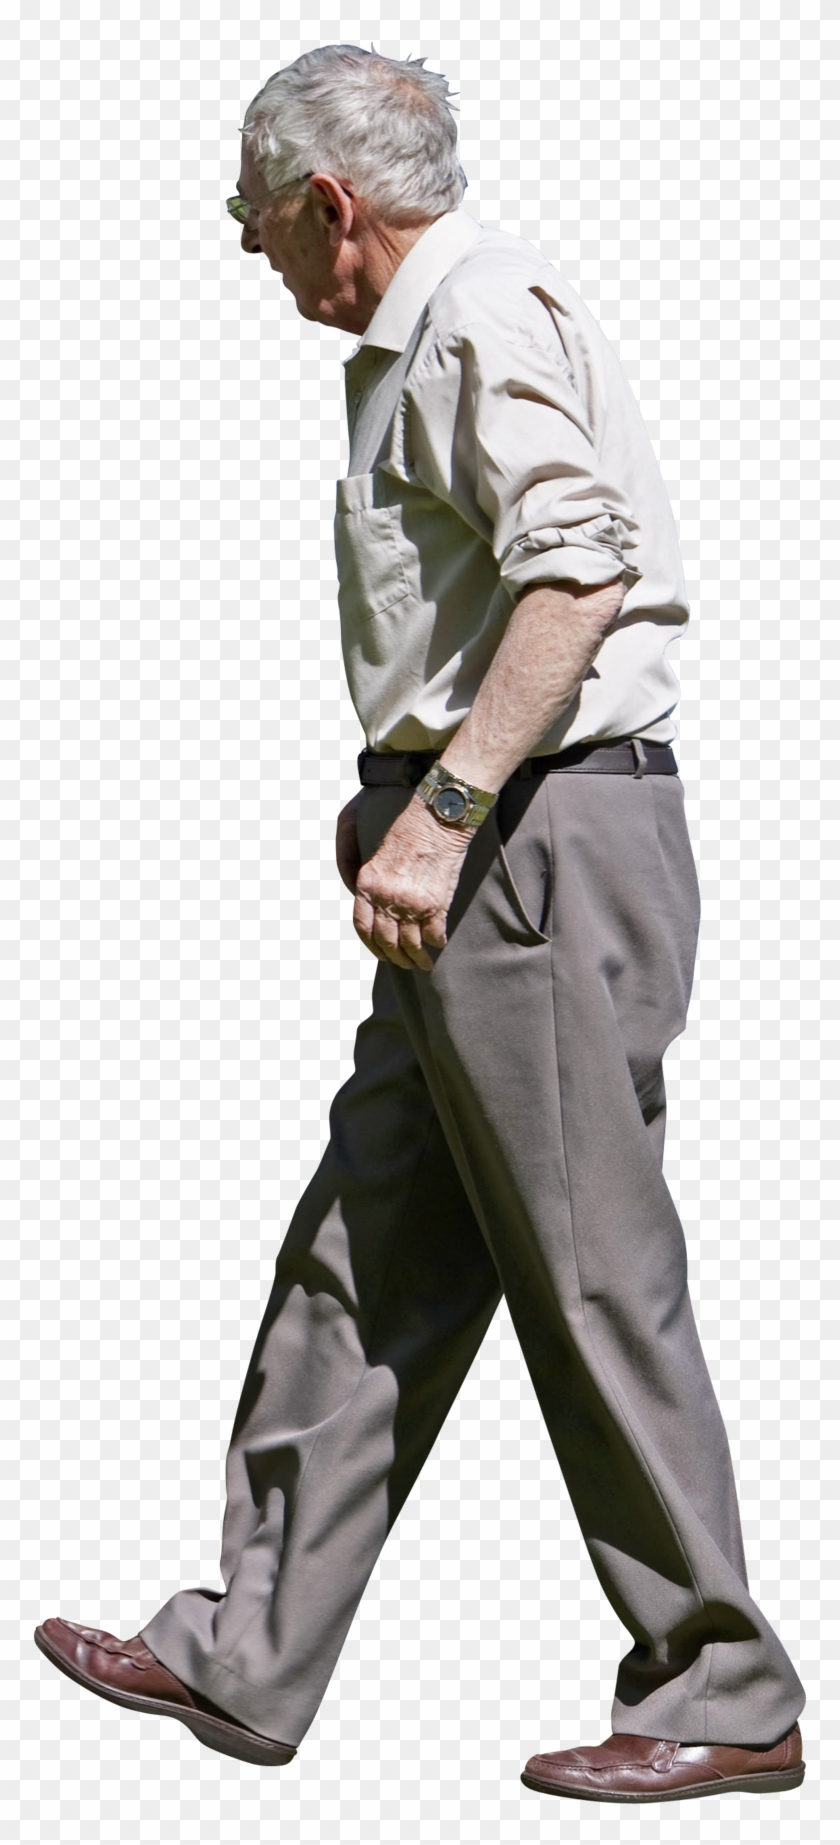 Elderly Couple Holding Hands Walking Garry Knight/cc - Old People Png Walking Clipart